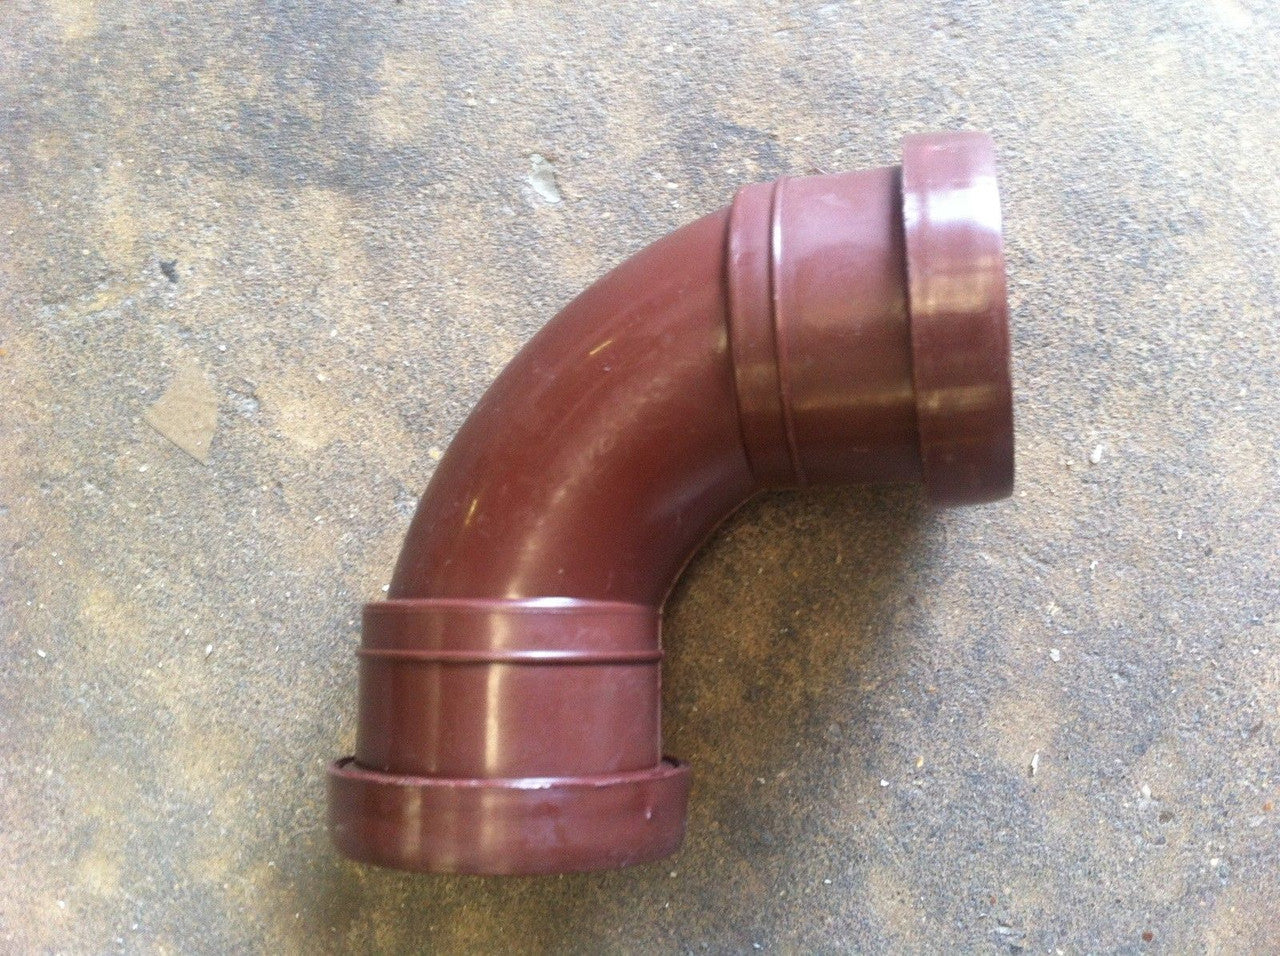 40mm Waste Pipe 90deg Sweeping Elbow - Brown Push-fit